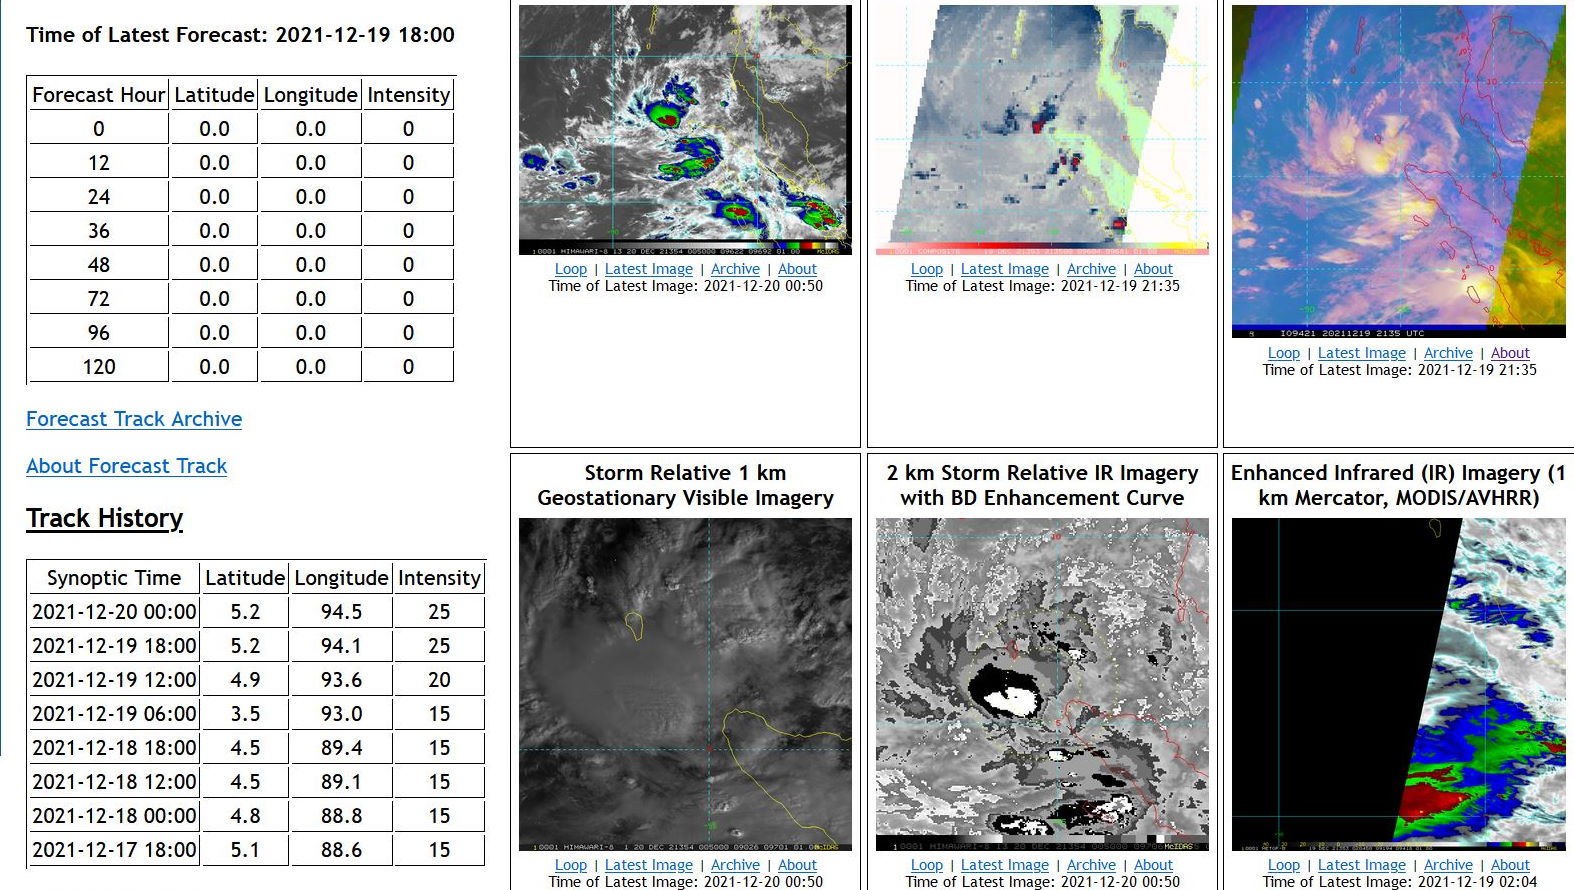 AN AREA OF CONVECTION (INVEST 94B) HAS PERSISTED NEAR 4.8N  93.7E, APPROXIMATELY 435 NM SOUTHWEST OF PHUKET, THAILAND. ANIMATED  ENHANCED INFRARED SATELITE IMAGERY DEPICTS BROAD DEEP CONVECTION  OVER A LOW LEVEL CIRCULATION (LLC). RECENT SCATTEROMETRY DATA SHOWS  25 TO 30 KT WINDS SURROUNDING A LLC. ENVIRONMENTAL ANALYSIS DEPICTS  MARGINALLY FAVORABLE CONDITIONS FOR DEVELOPMENT WITH ROBUST POLEWARD  OUTFLOW ALOFT AND WARM (28-29C) SEA SURFACE TEMPERATURES, OFFSET BY  HIGH (15-25KT) VERTICAL WIND SHEAR. GLOBAL MODELS ARE IN AGREEMENT  THAT 94B WILL HAVE A GENERAL EASTWARD TRACK INTO THE NORTH-WESTERN  TIP OF SUMATRA.  MAXIMUM SUSTAINED SURFACE WINDS ARE ESTIMATED AT 25  TO 30 KNOTS. MINIMUM SEA LEVEL PRESSURE IS ESTIMATED TO BE NEAR 1005  MB. THE POTENTIAL FOR THE DEVELOPMENT OF A SIGNIFICANT TROPICAL  CYCLONE WITHIN THE NEXT 24 HOURS IS LOW.